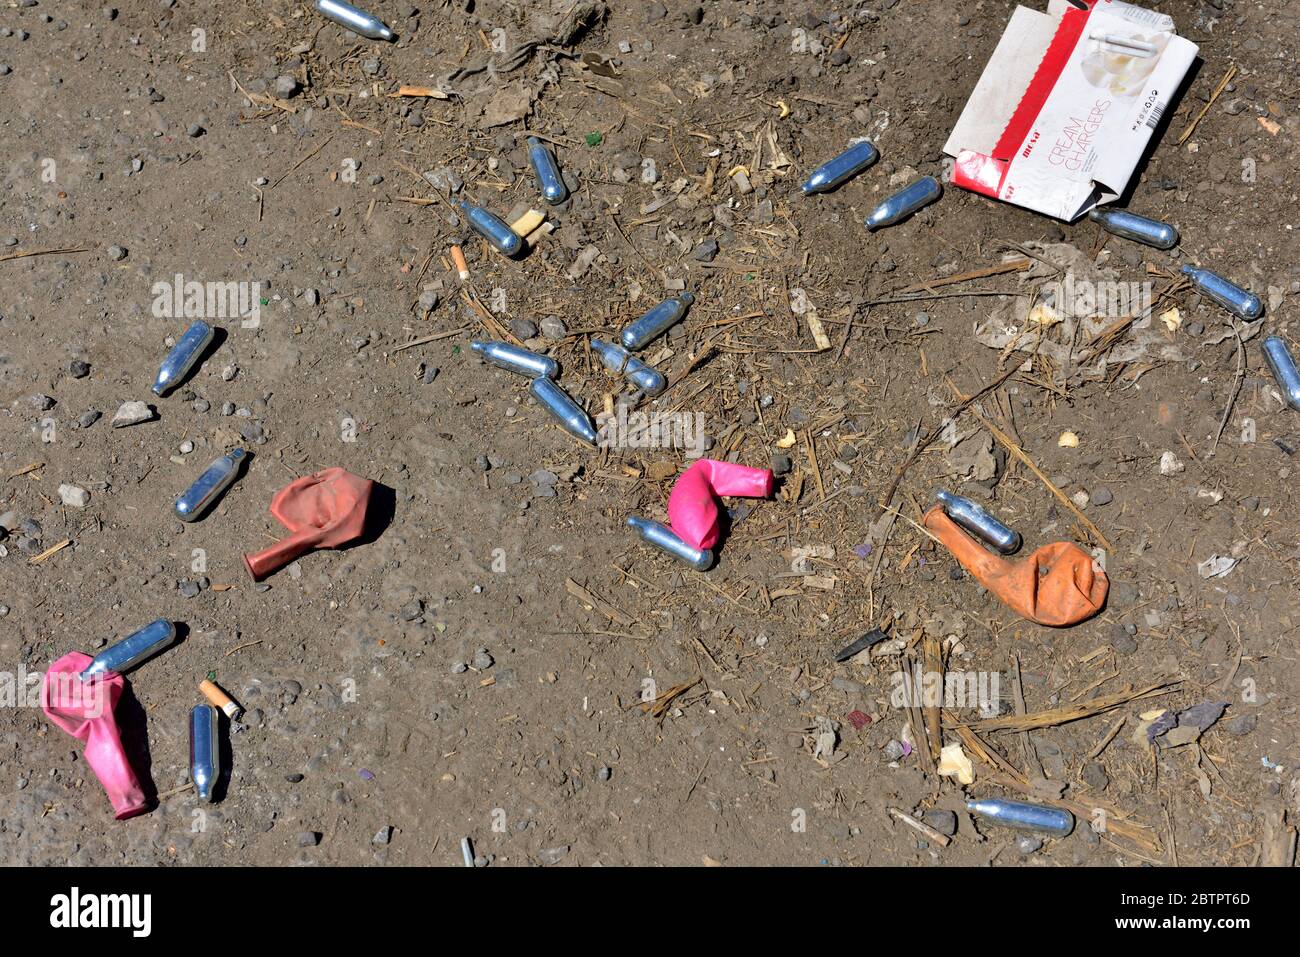 Discarded nitrous oxide (laughing gas) canisters and balloons littering ground Stock Photo